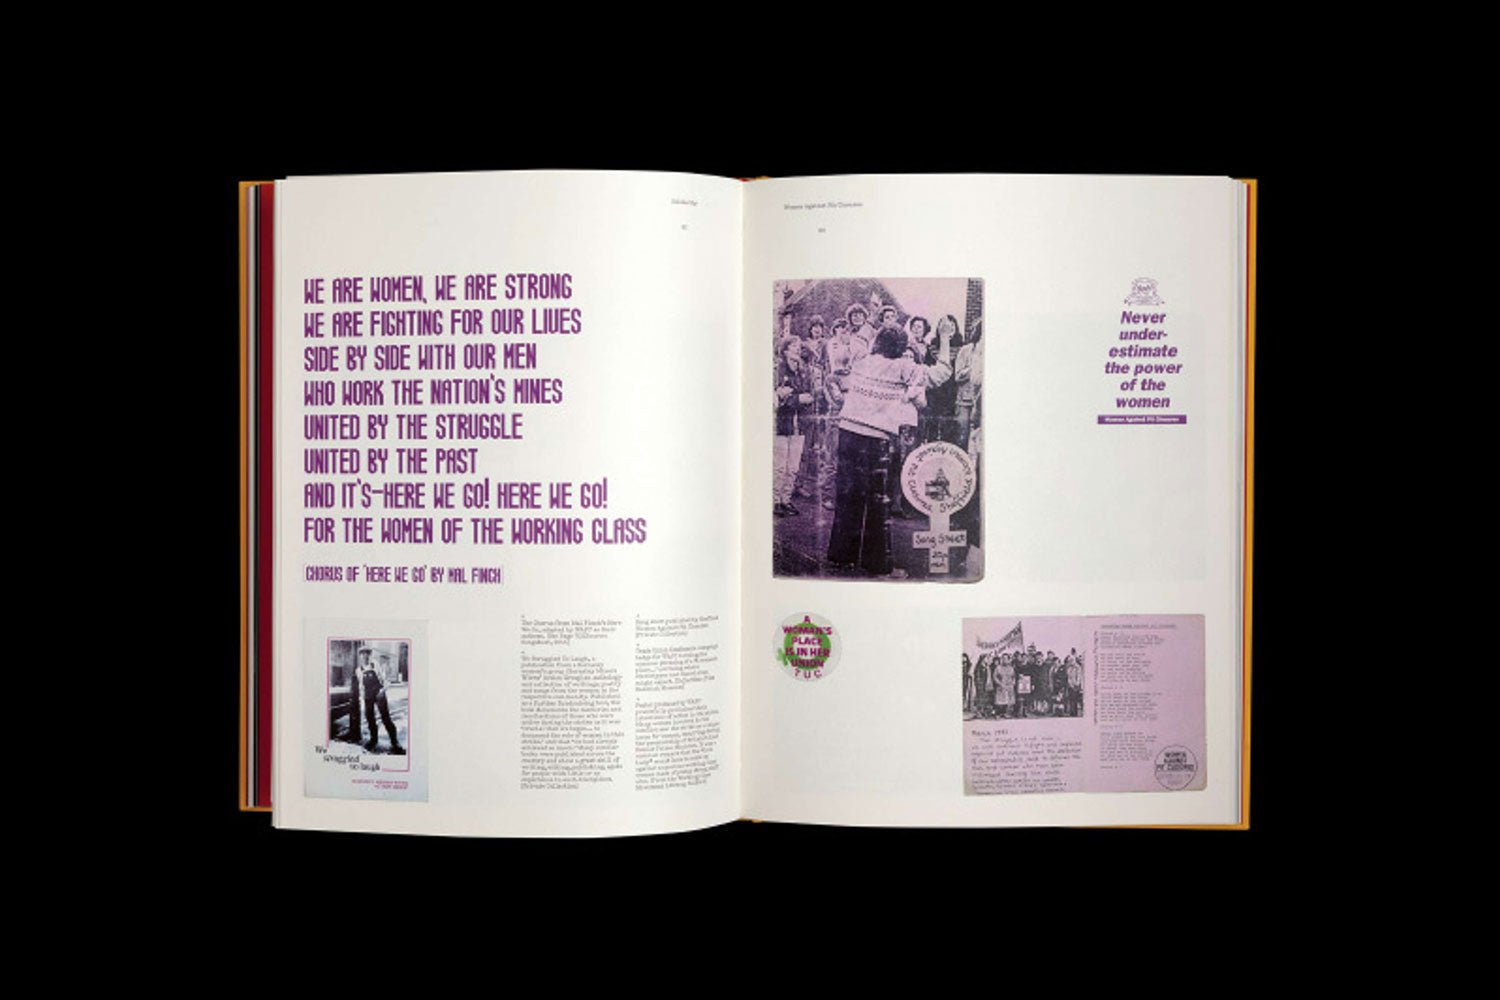 In Loving Memory of Work: A Visual Record Of The UK Miner's Strike 1984-85-ephemera-labour-community-TACO!-Rough Trade